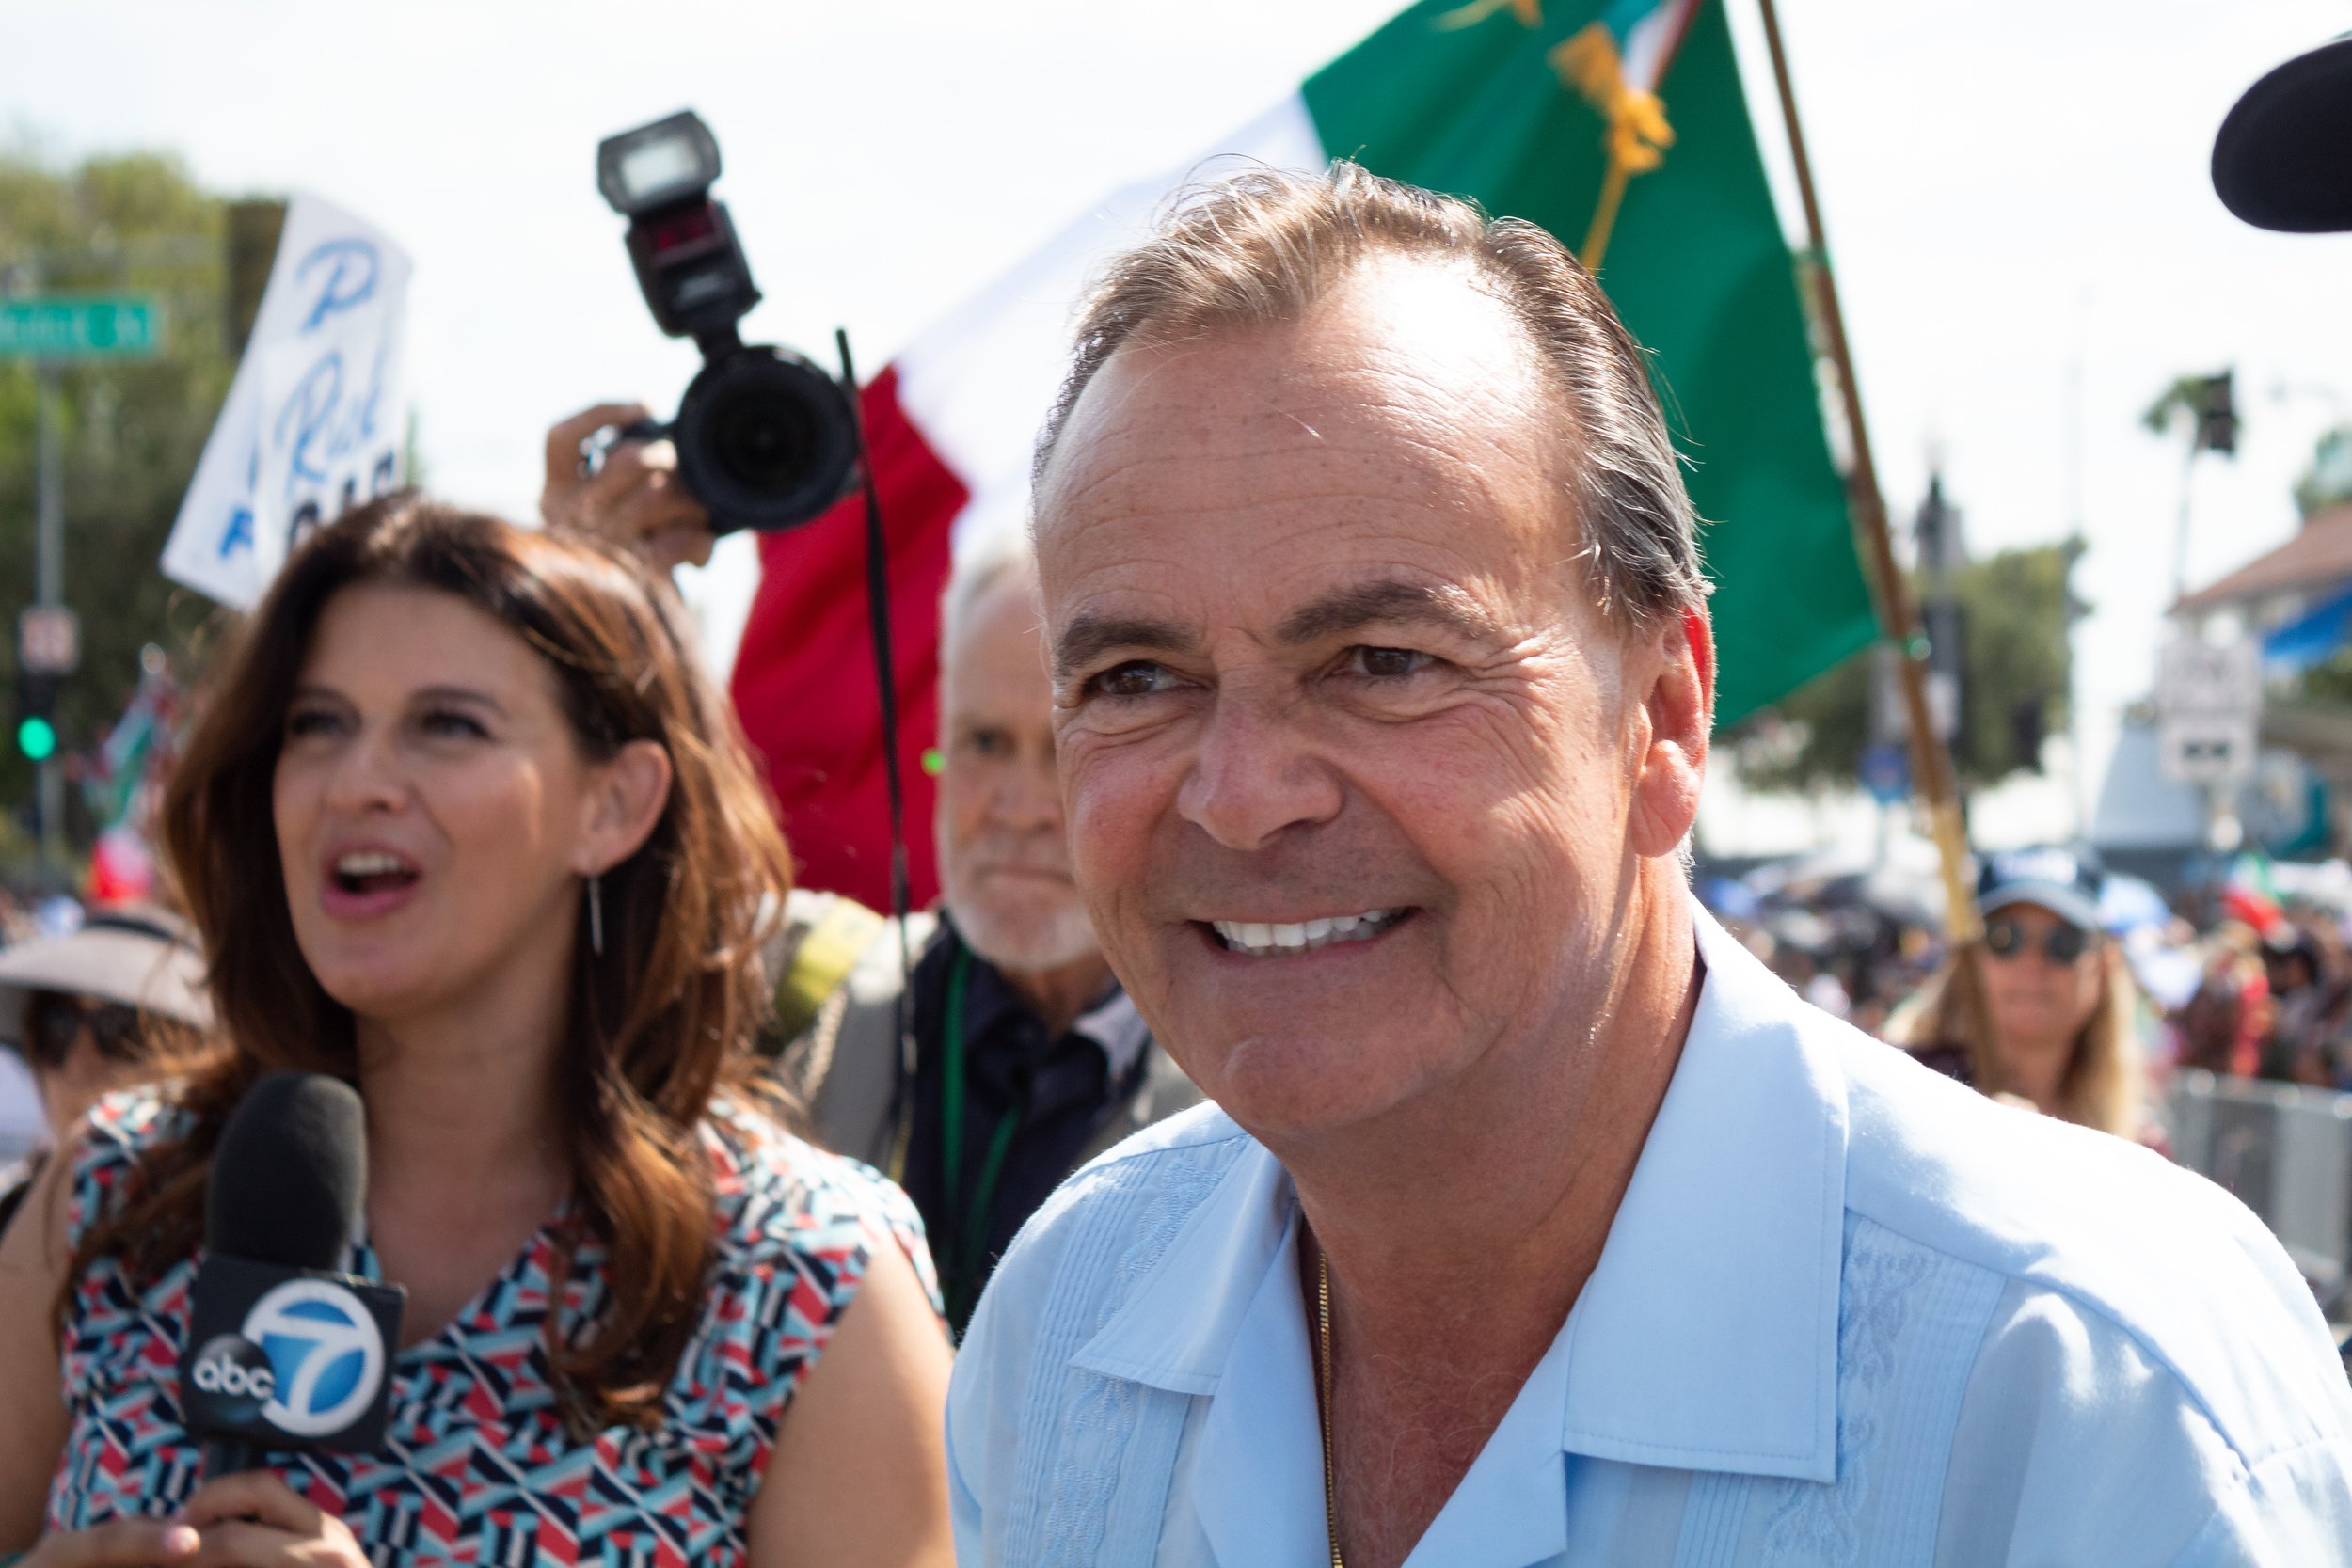  Los Angeles mayoral candidate Rick Caruso speaking to members of the crowd and media at the Mexican Independence Day Parade & Festival in East Los Angeles, Calif. on Sept. 18, 2022. (Caylo Seals | The Corsair) 